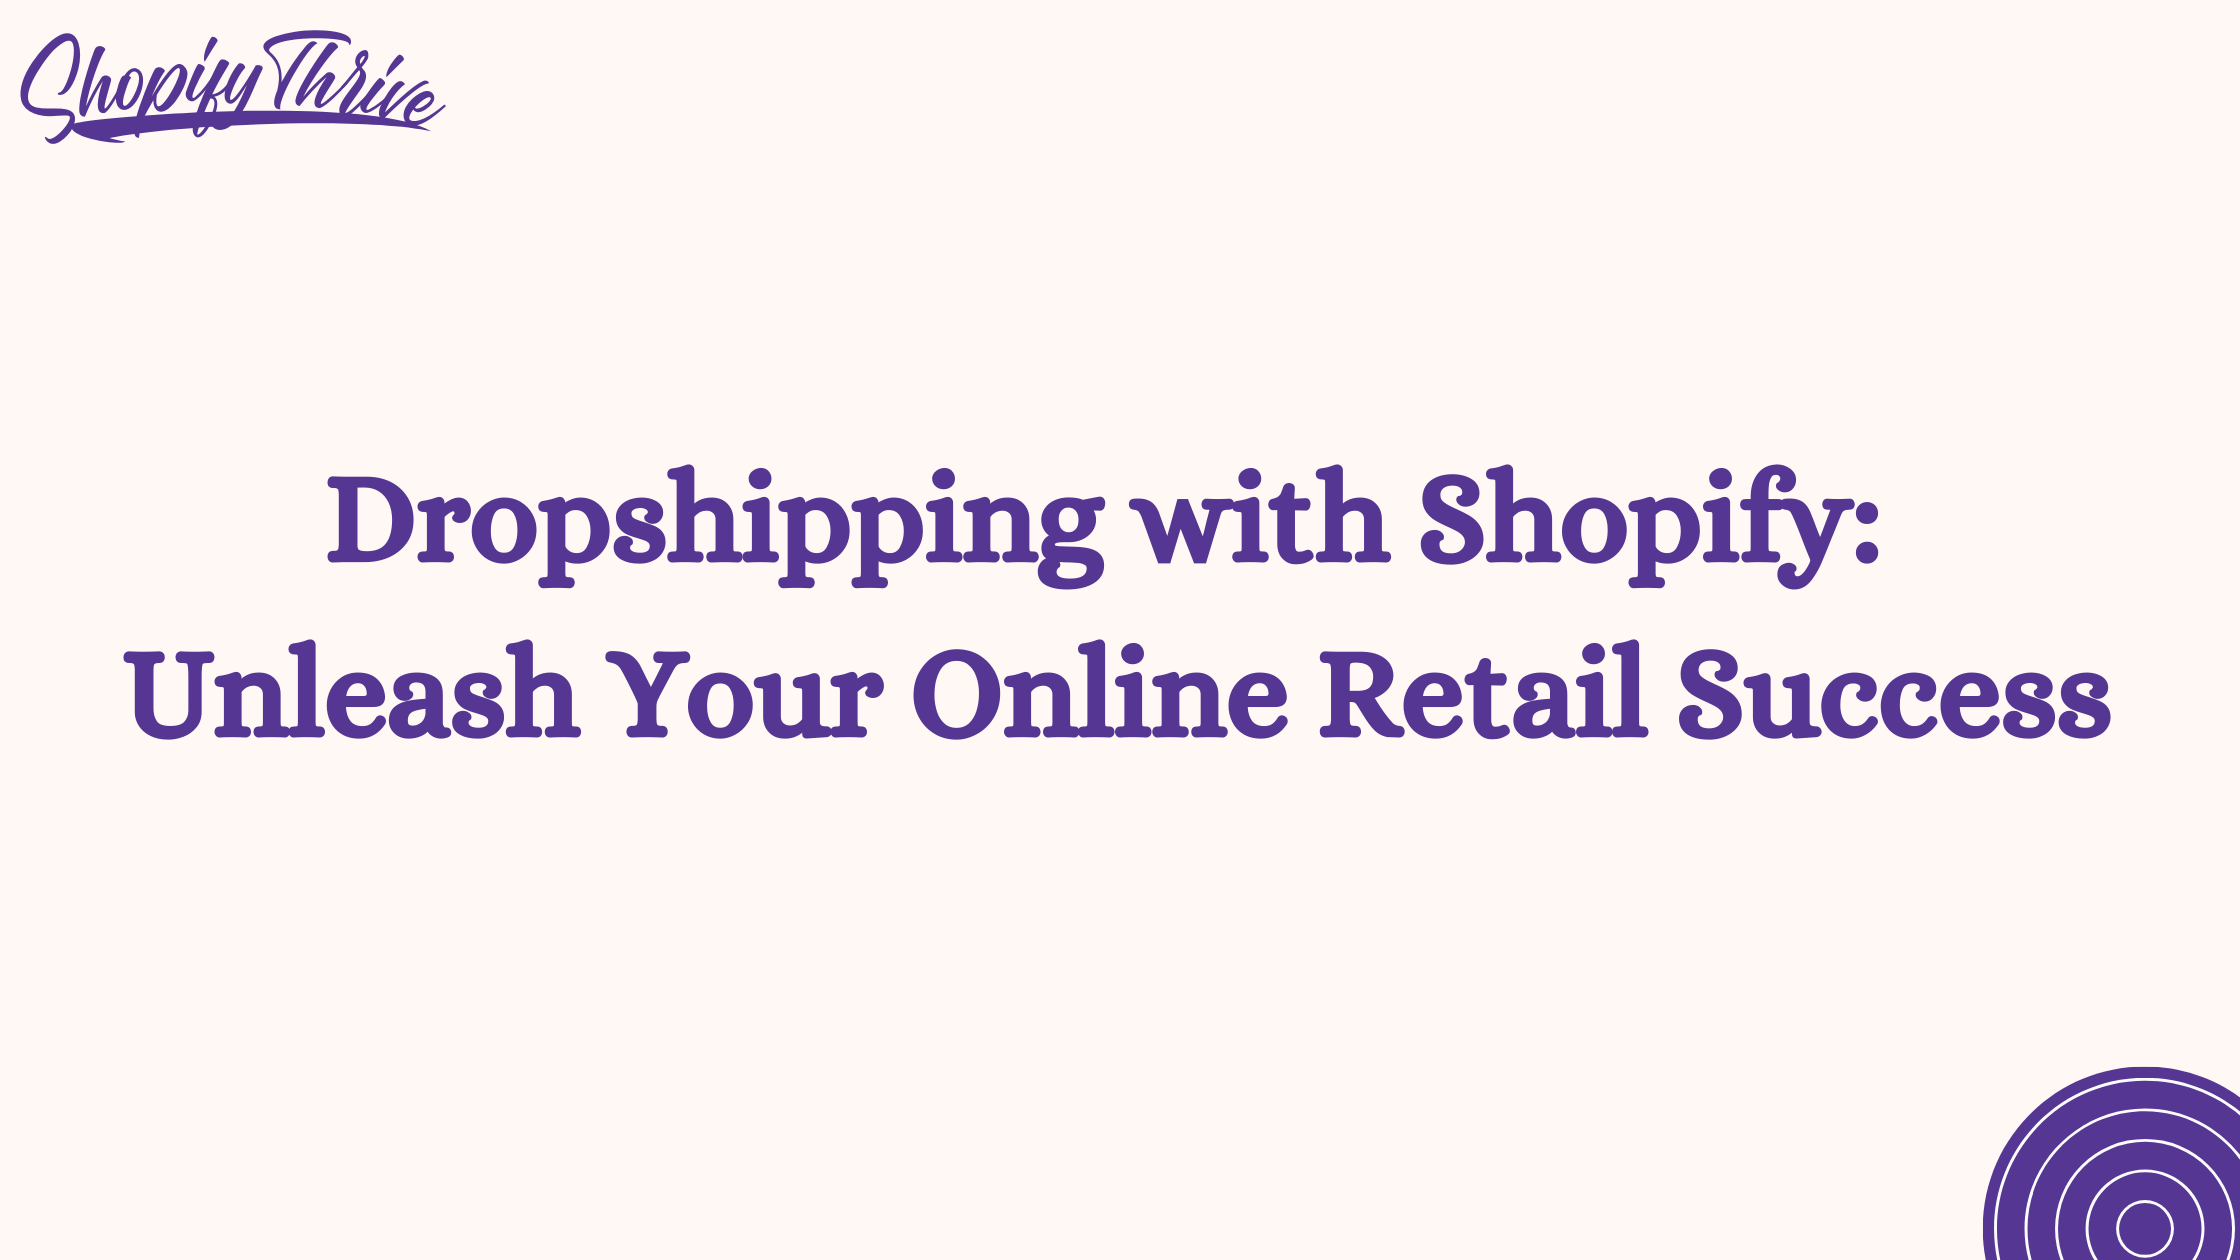 Dropshipping with Shopify: Unleash Your Online Retail Success